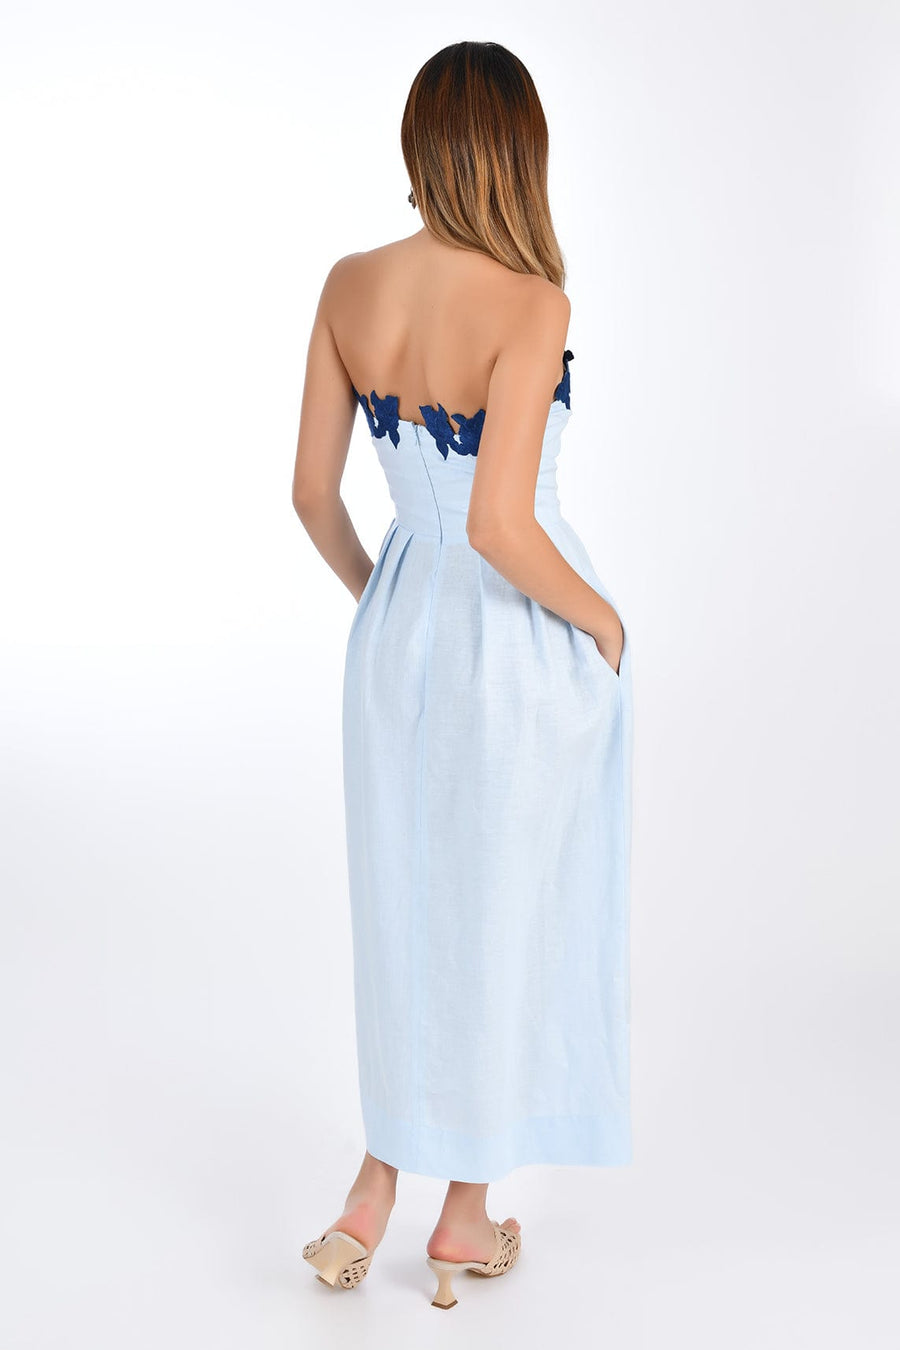 Fanm Mon Linen Lorr Midi Dress in Light Lagoon, showcasing hand-embroidered floral appliques on back. Back View.